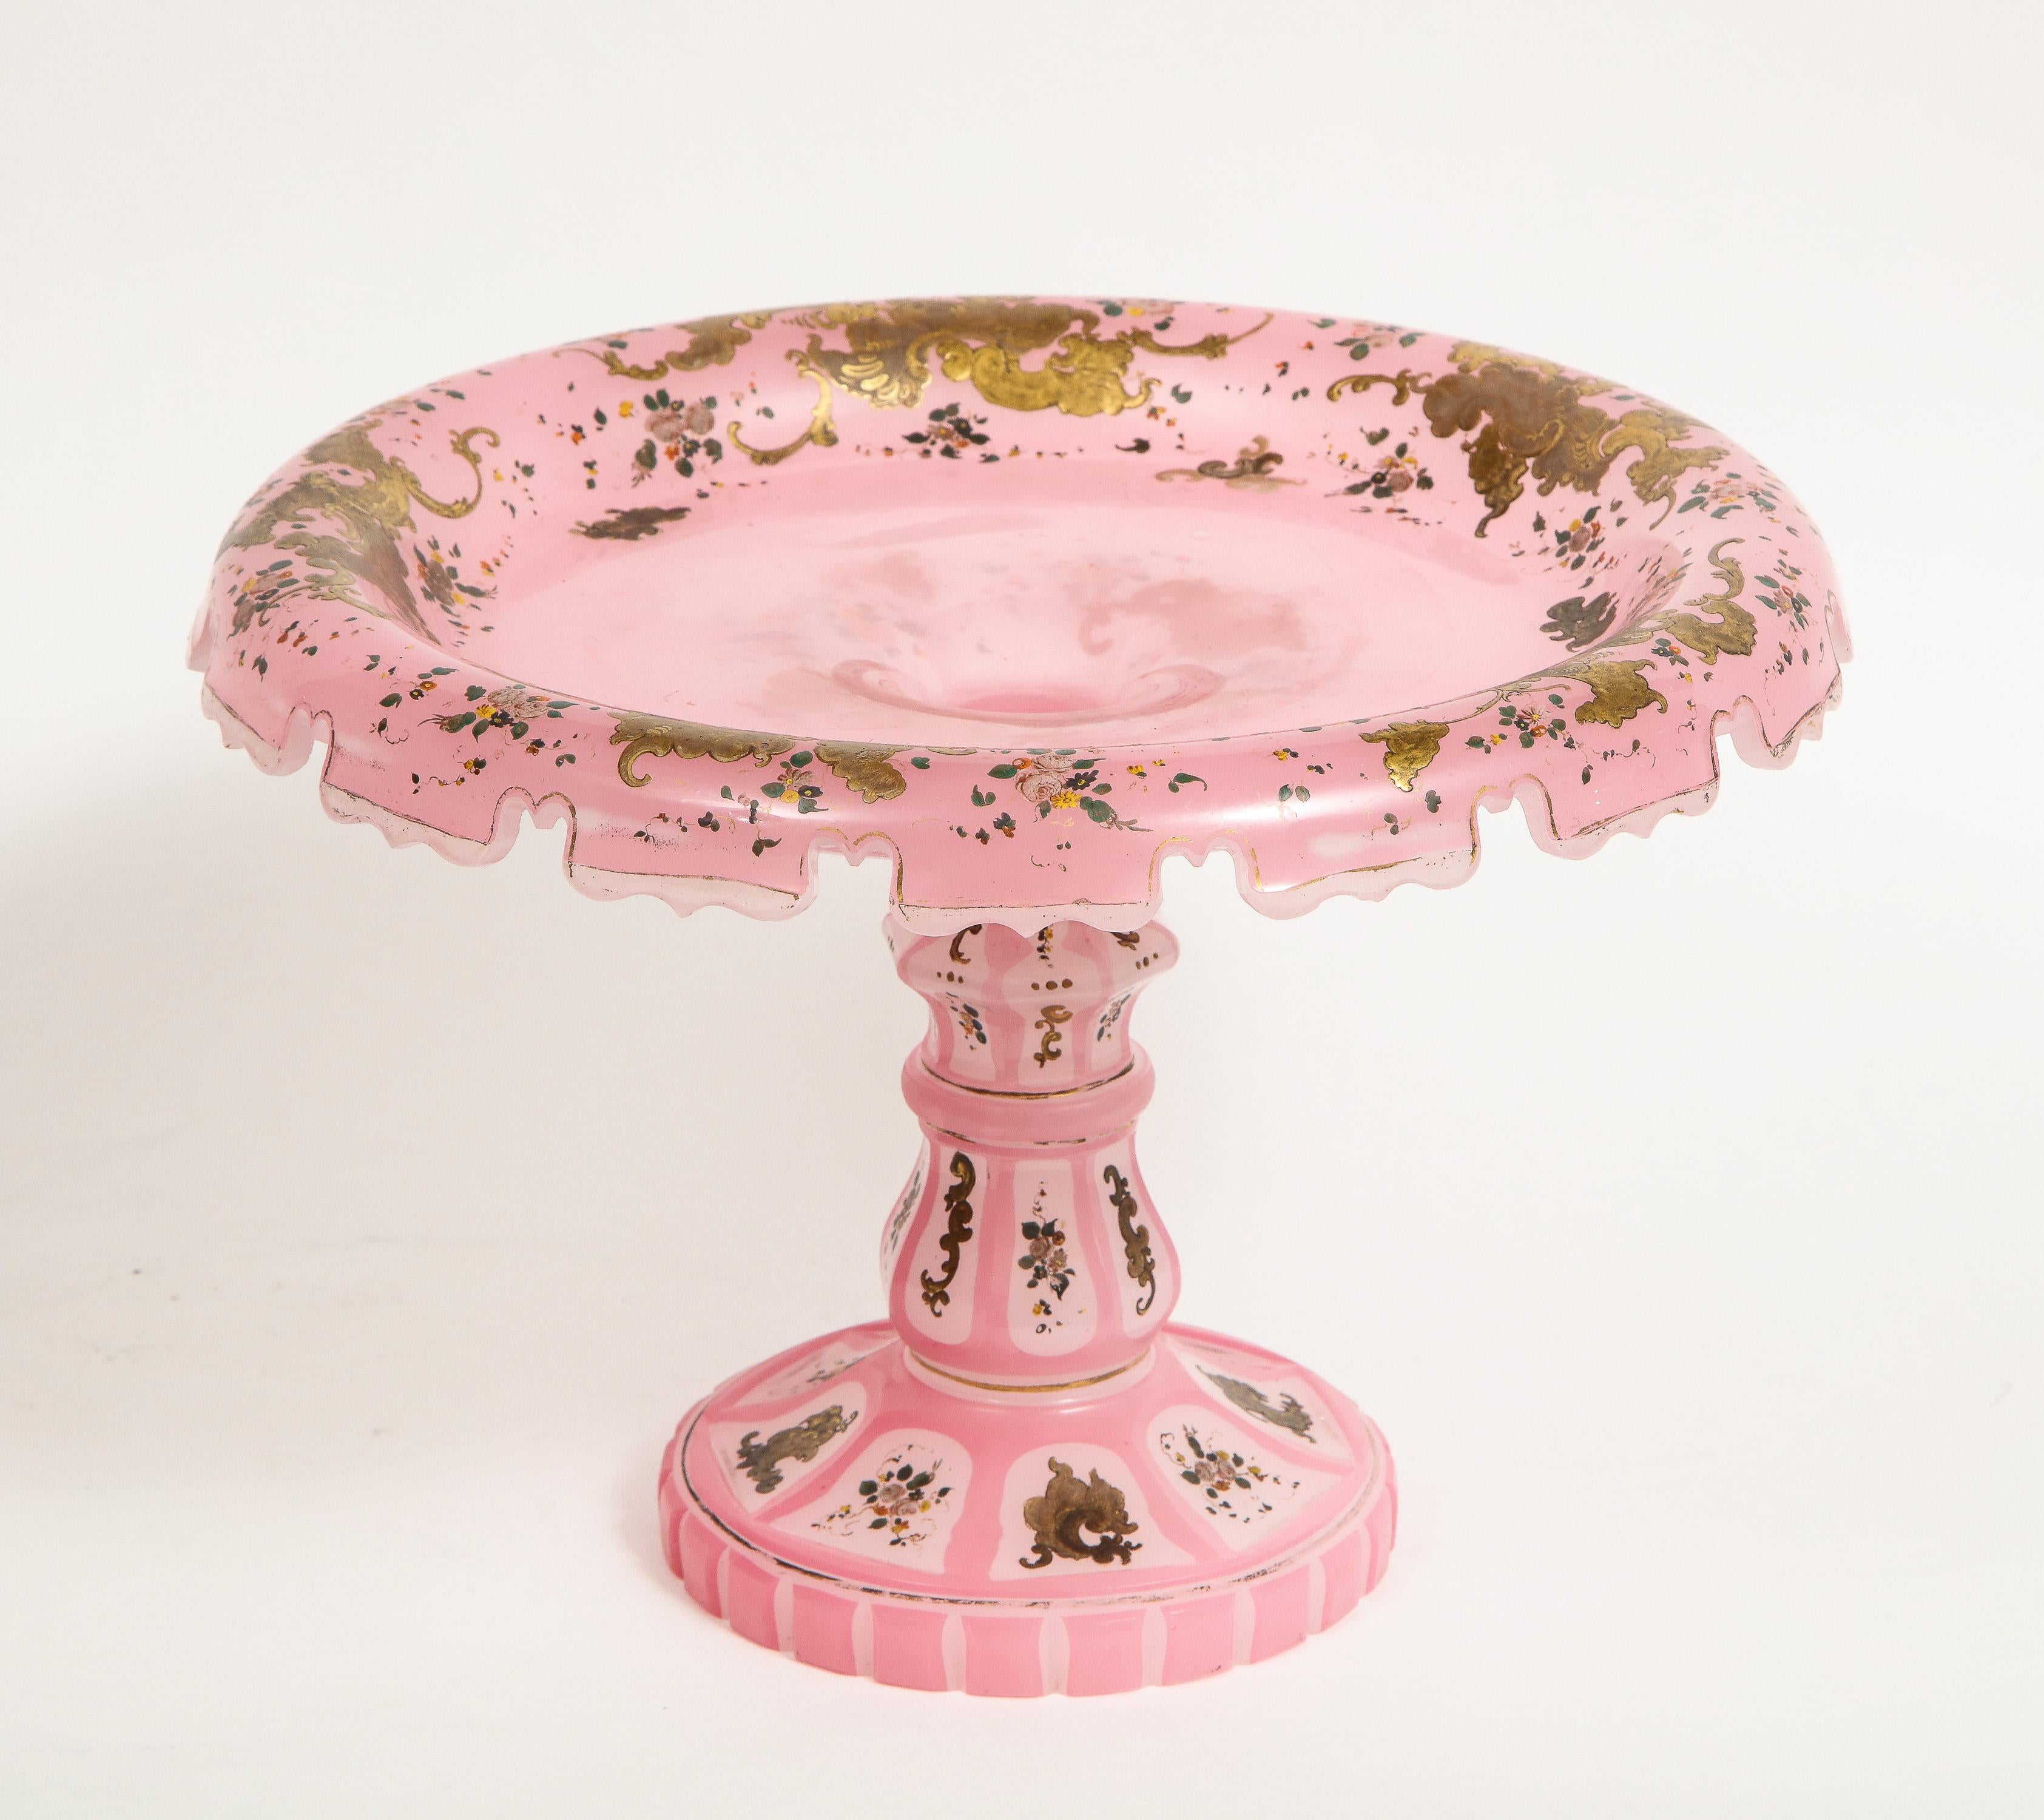 Exceptional Quality Pink Triple Overlay Enameled Bohemian Glass Cake Stand 3